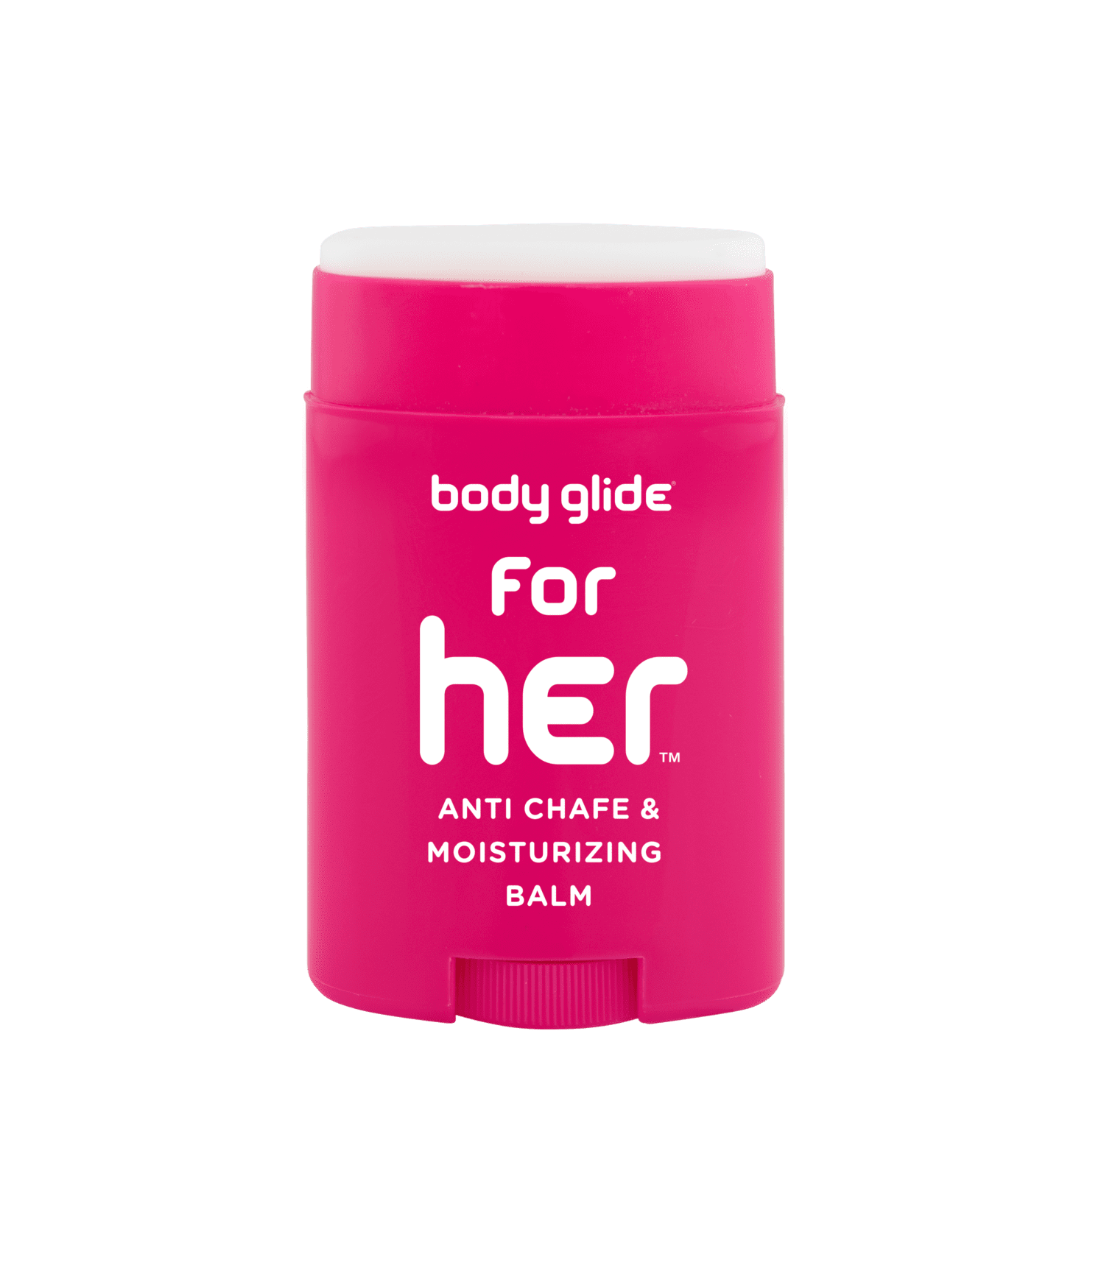 Body Glide - Never end the night barefoot, feet aching, carrying your heels  again! For all-day and all-night comfort, apply Body Glide Foot Glide balm  before you head out. Protect your heels